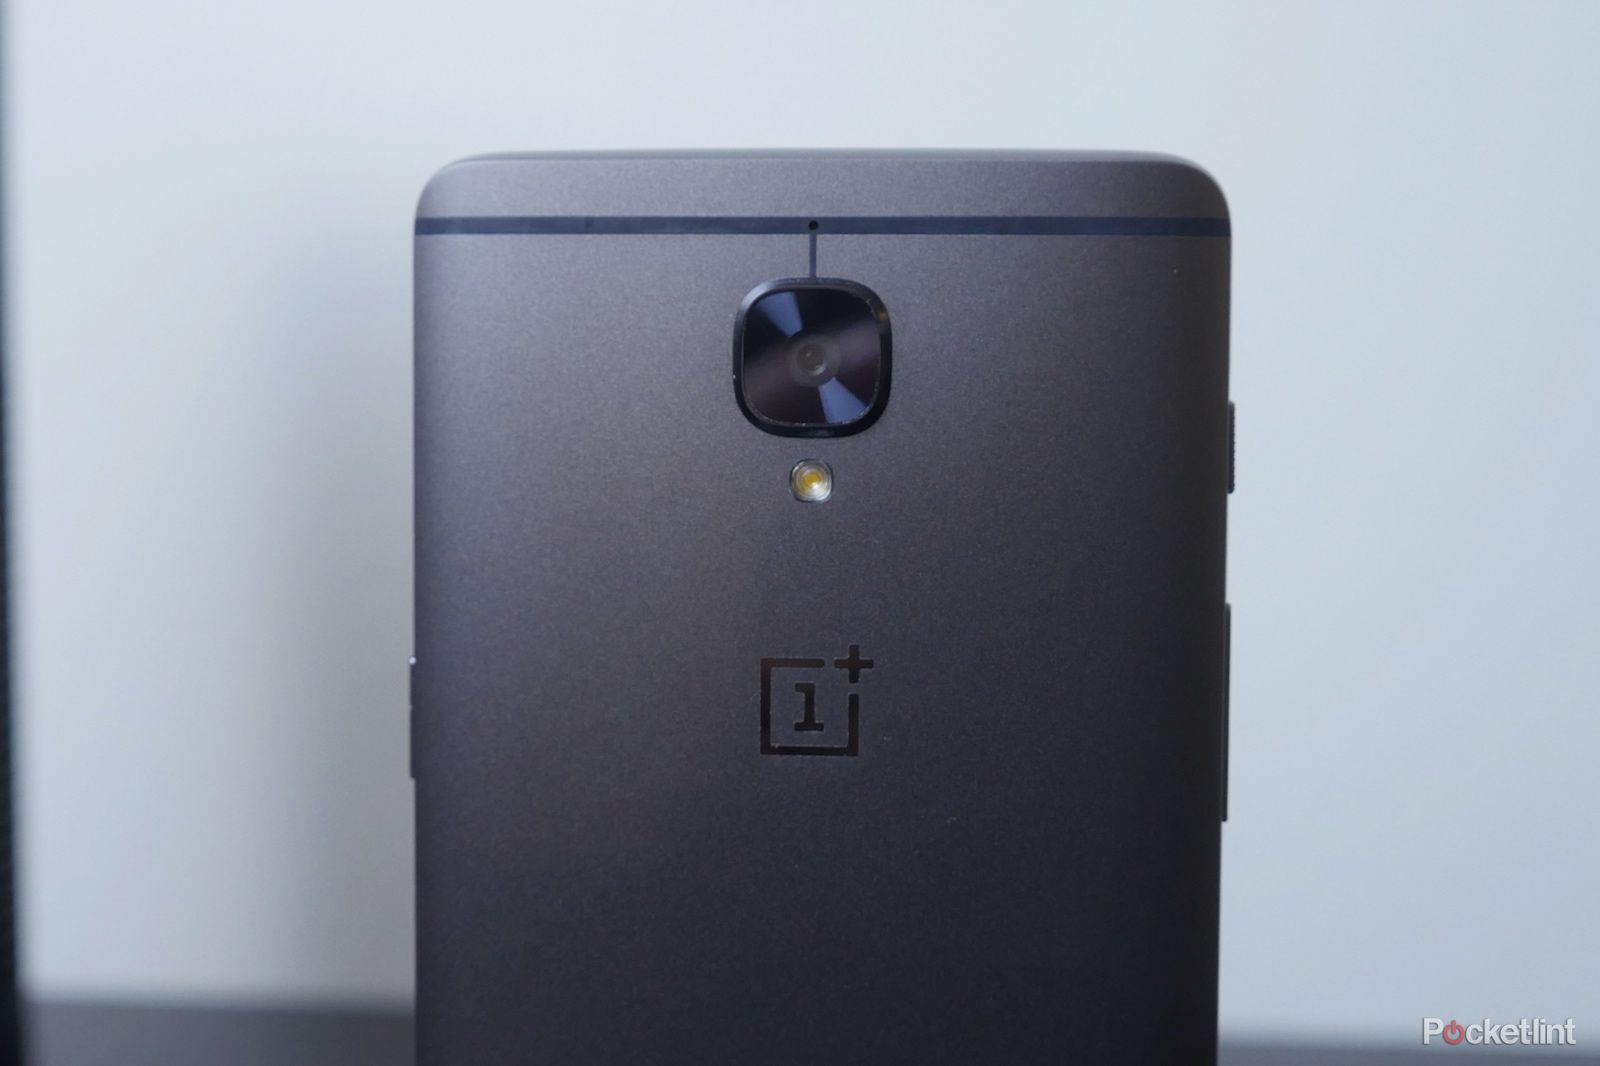 oneplus may skip 4th generation due to chinese superstition image 1